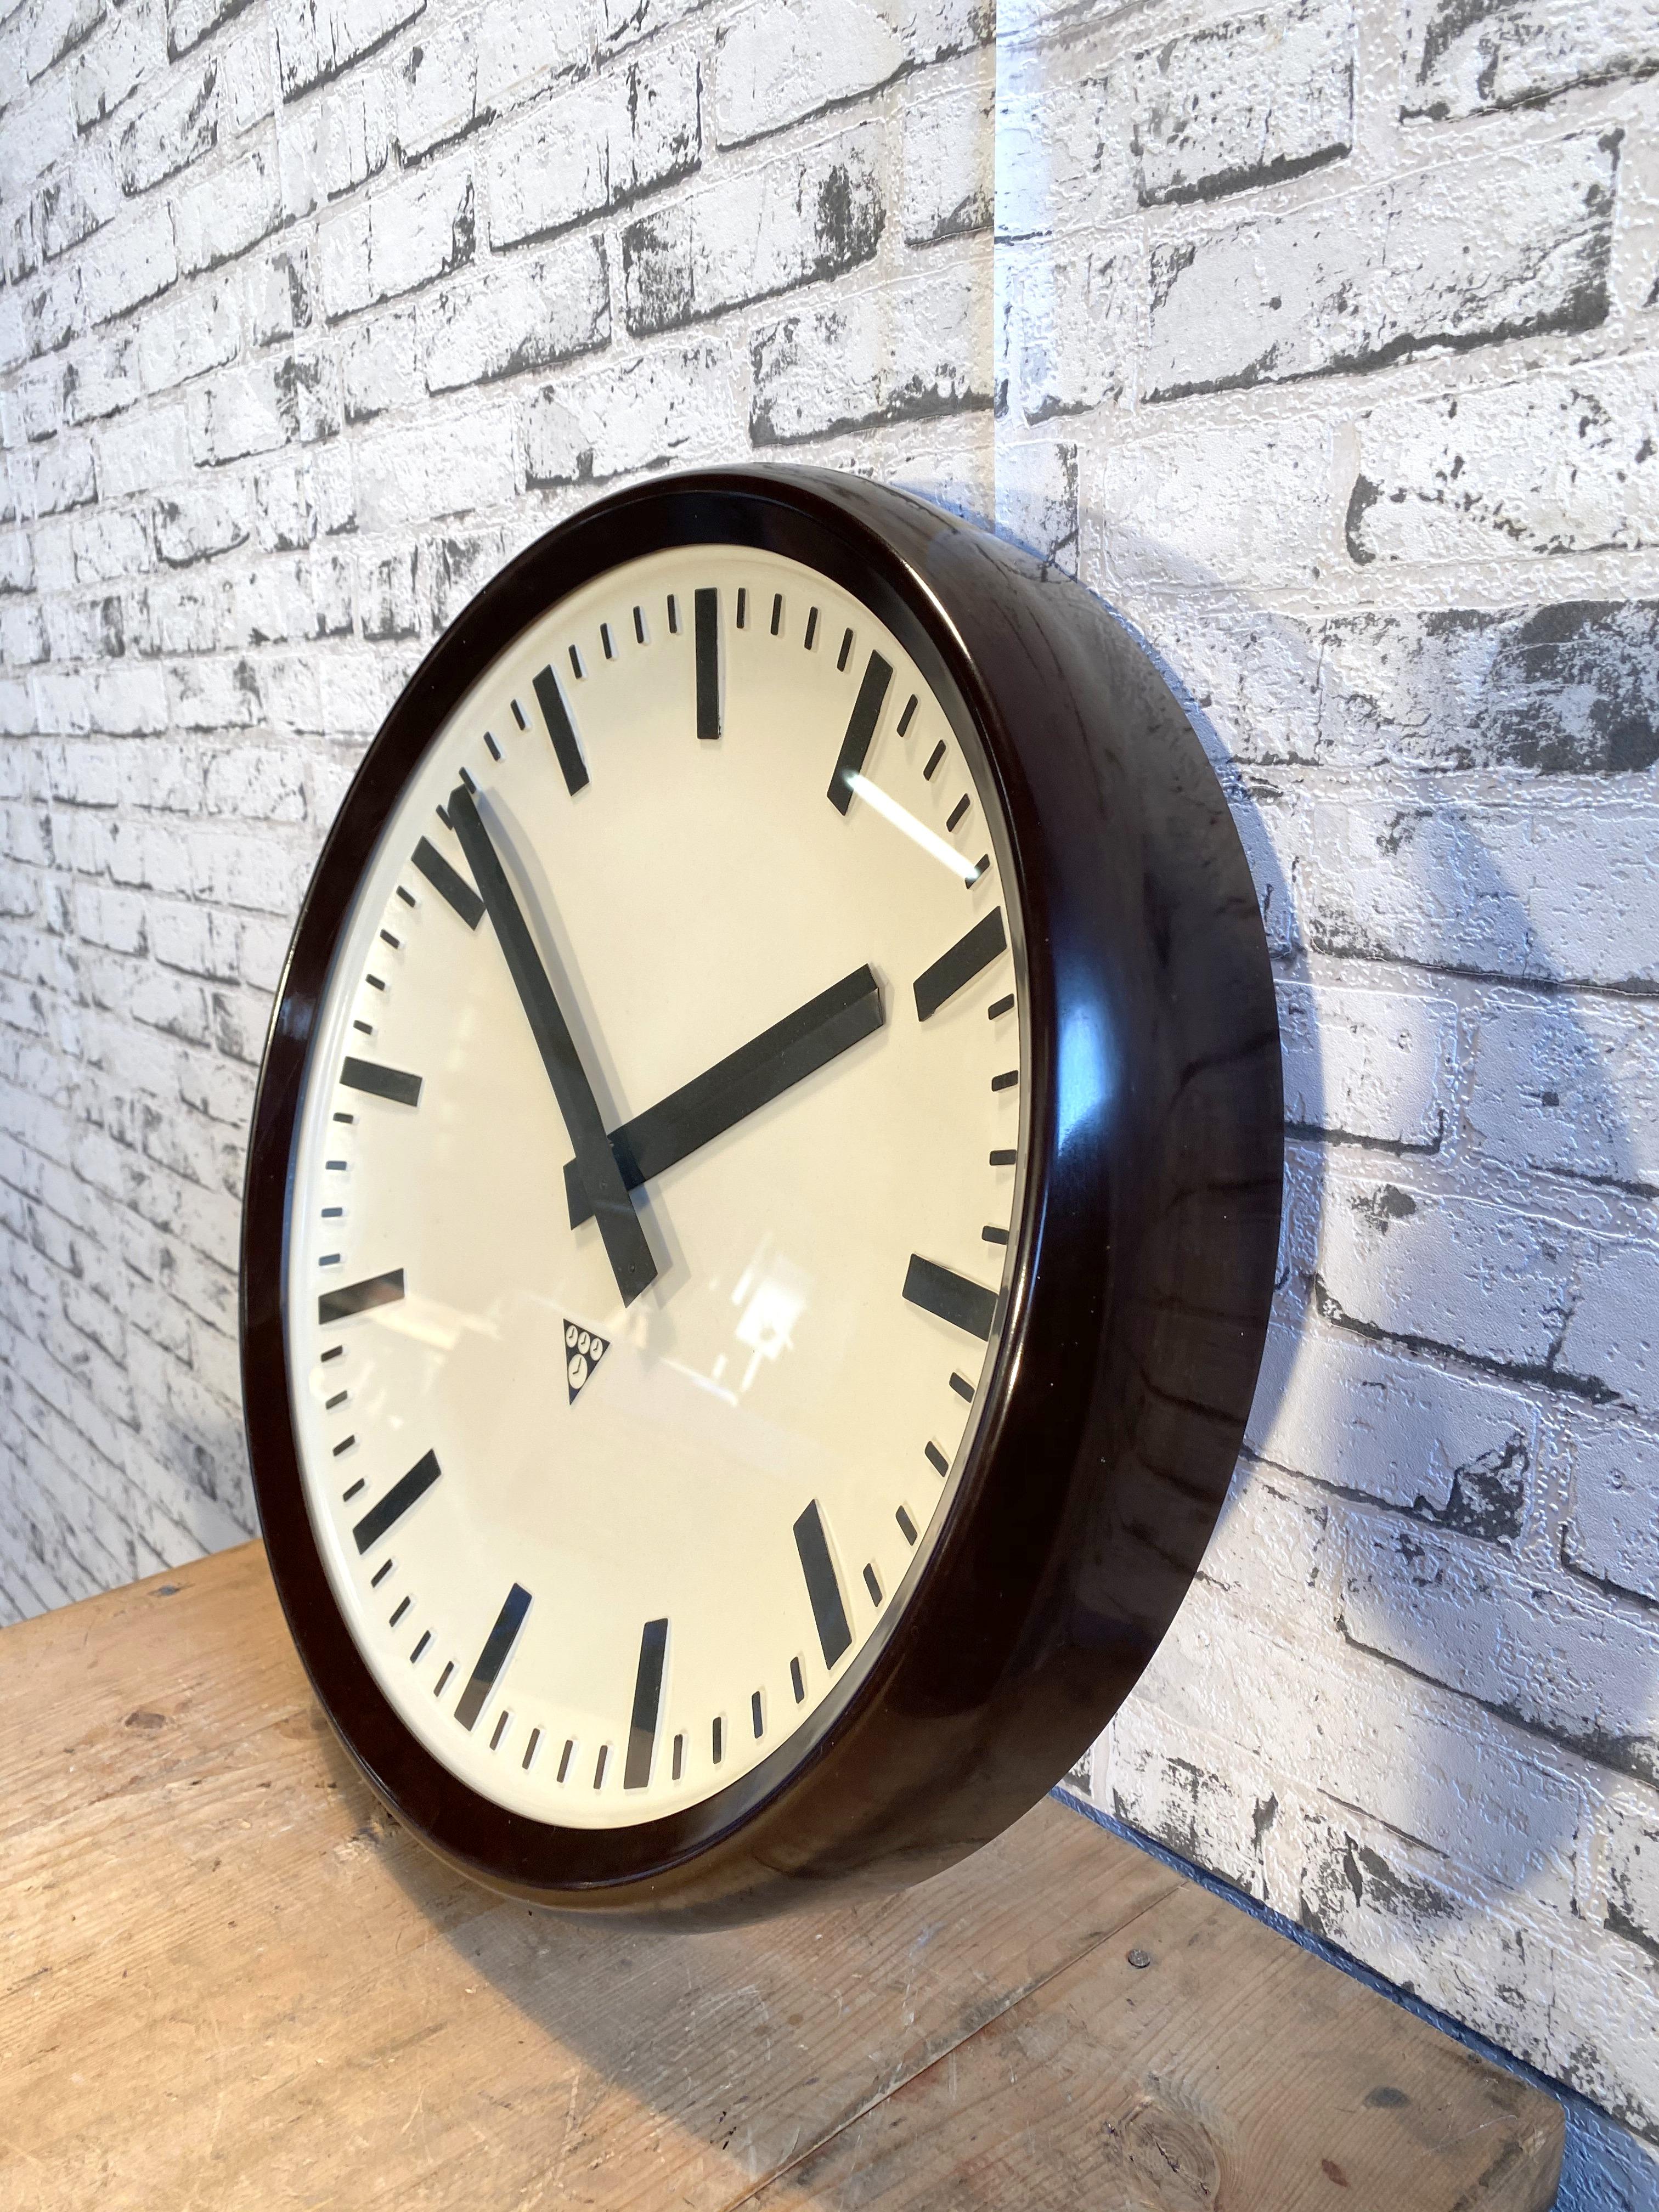 This large wall clock was produced by Pragotron in former Czechoslovakia during the 1960s.It features a brown bakelite frame, a white plastic dial, an aluminium hands and a clear glass cover. The piece has been converted into a battery-powered